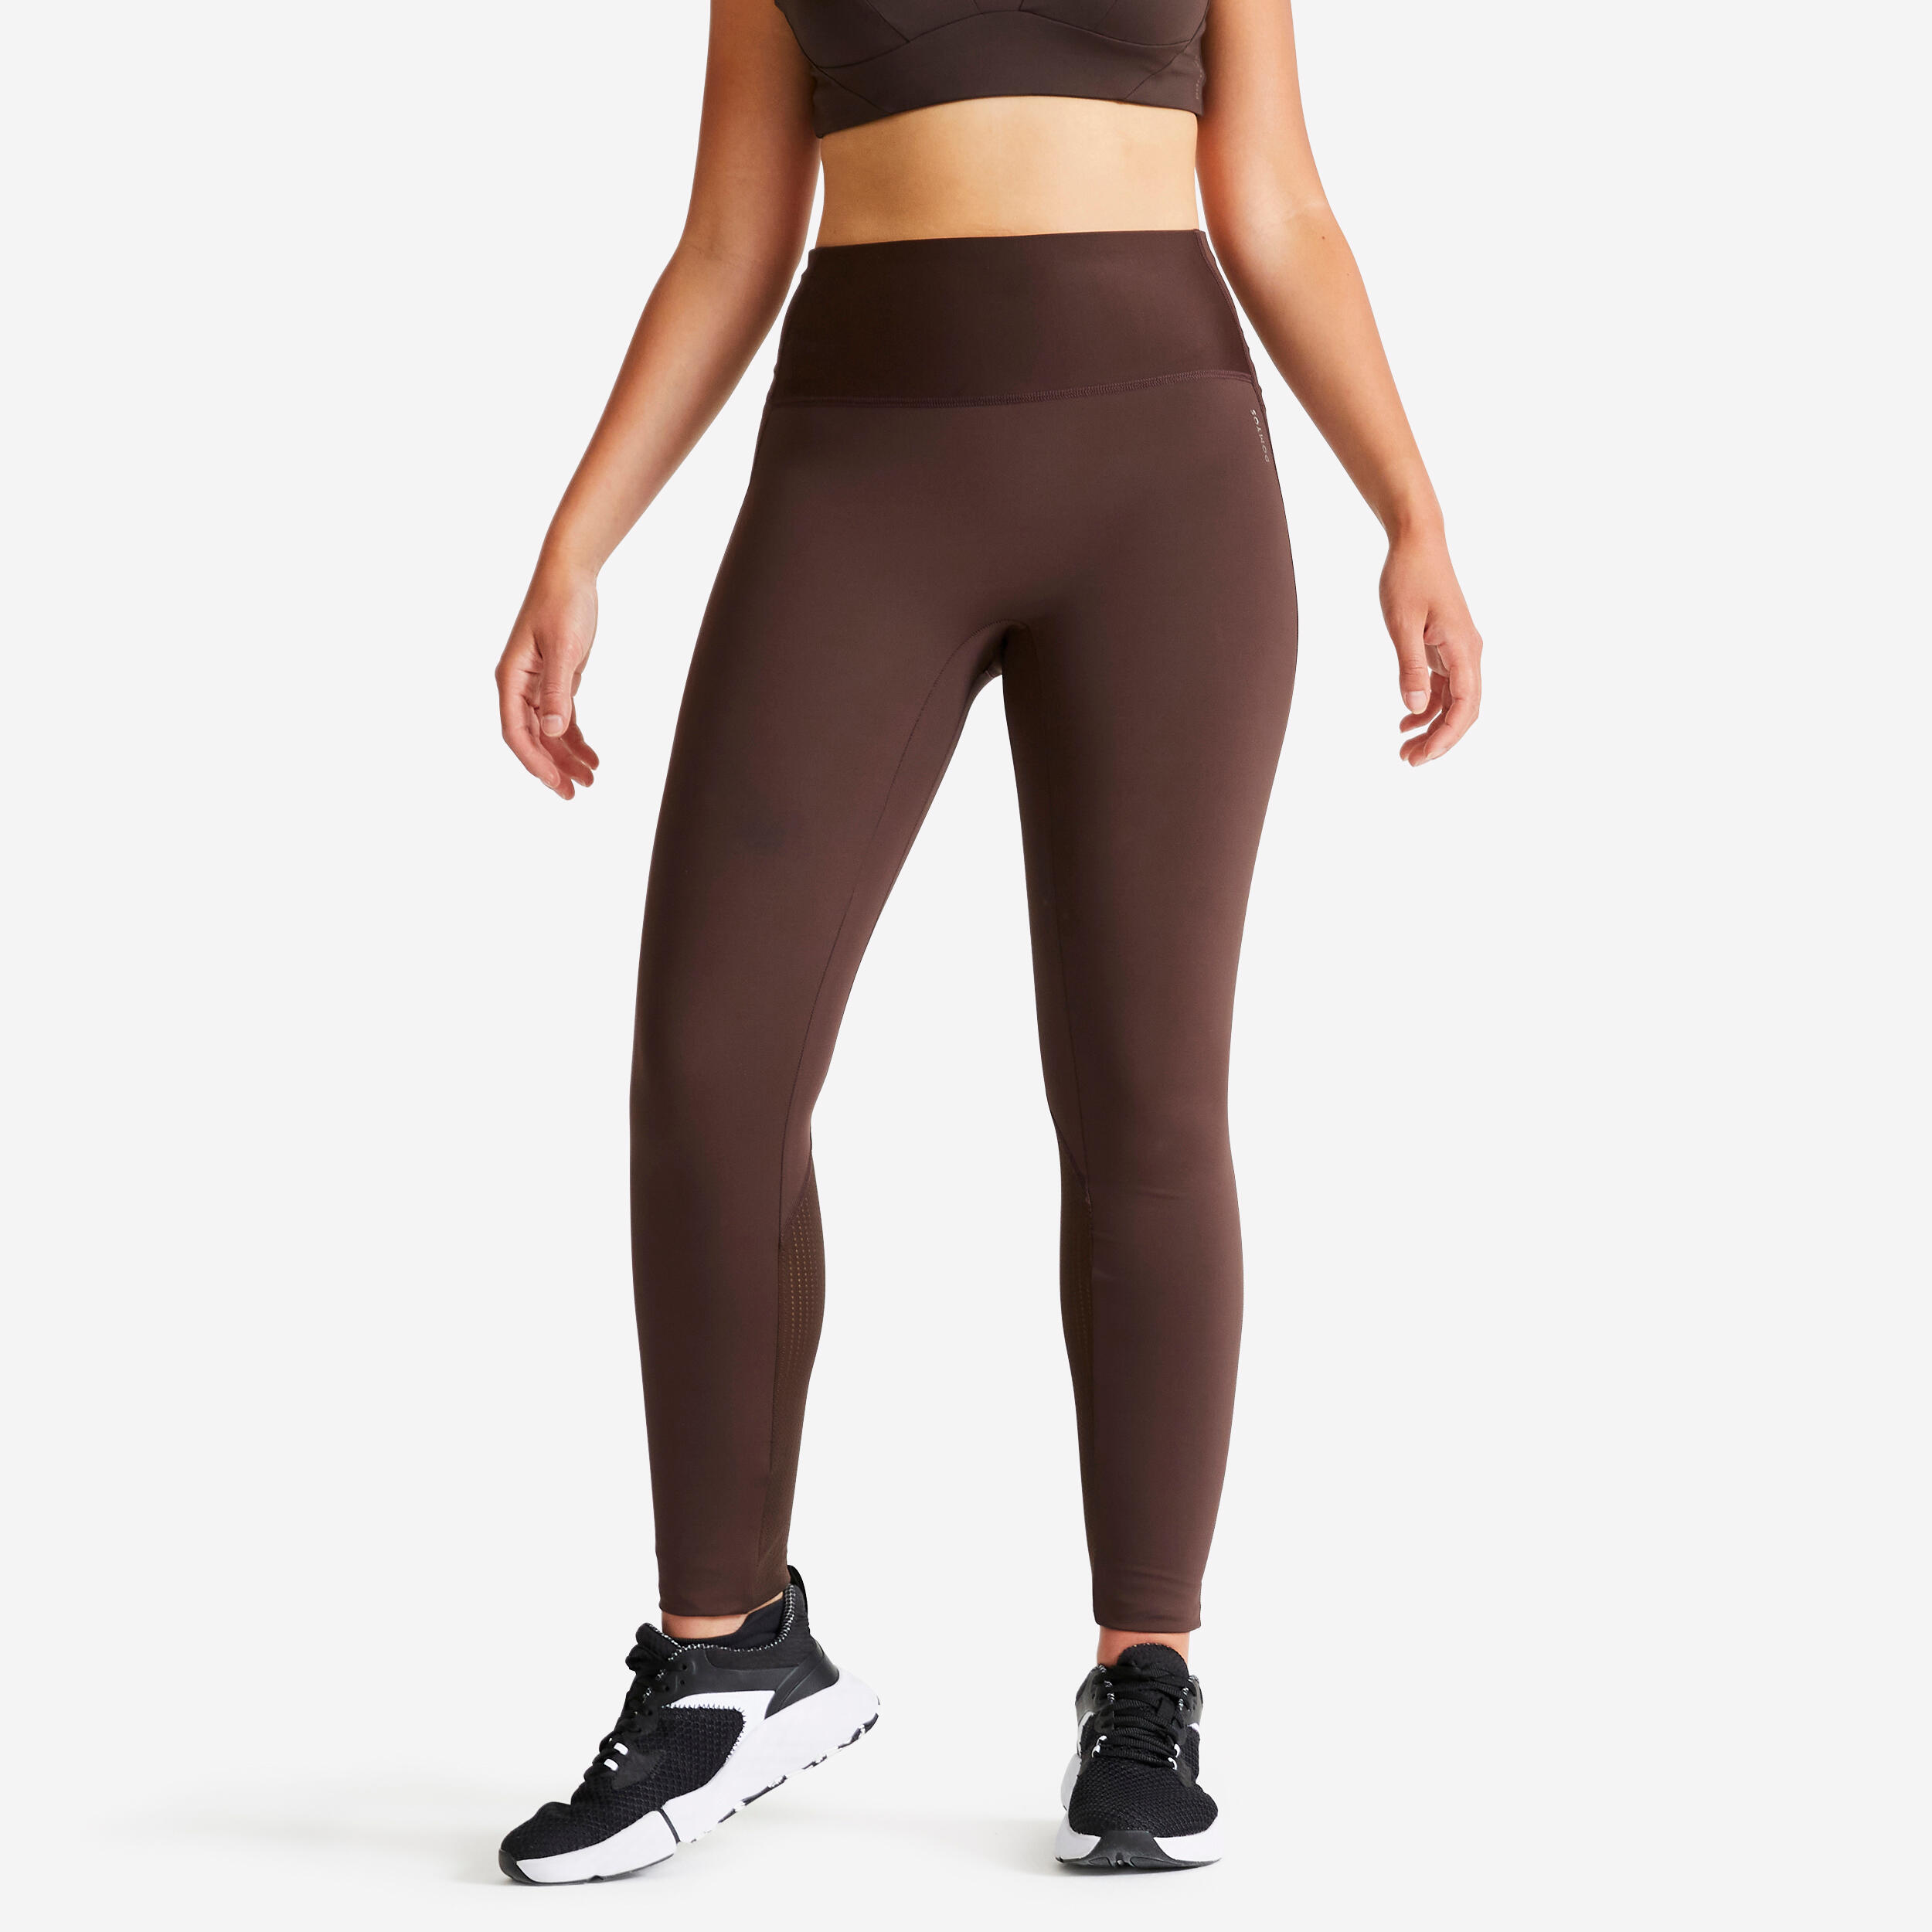 Women's High-Waisted Body-Shaping Fitness Cardio Leggings - Brown